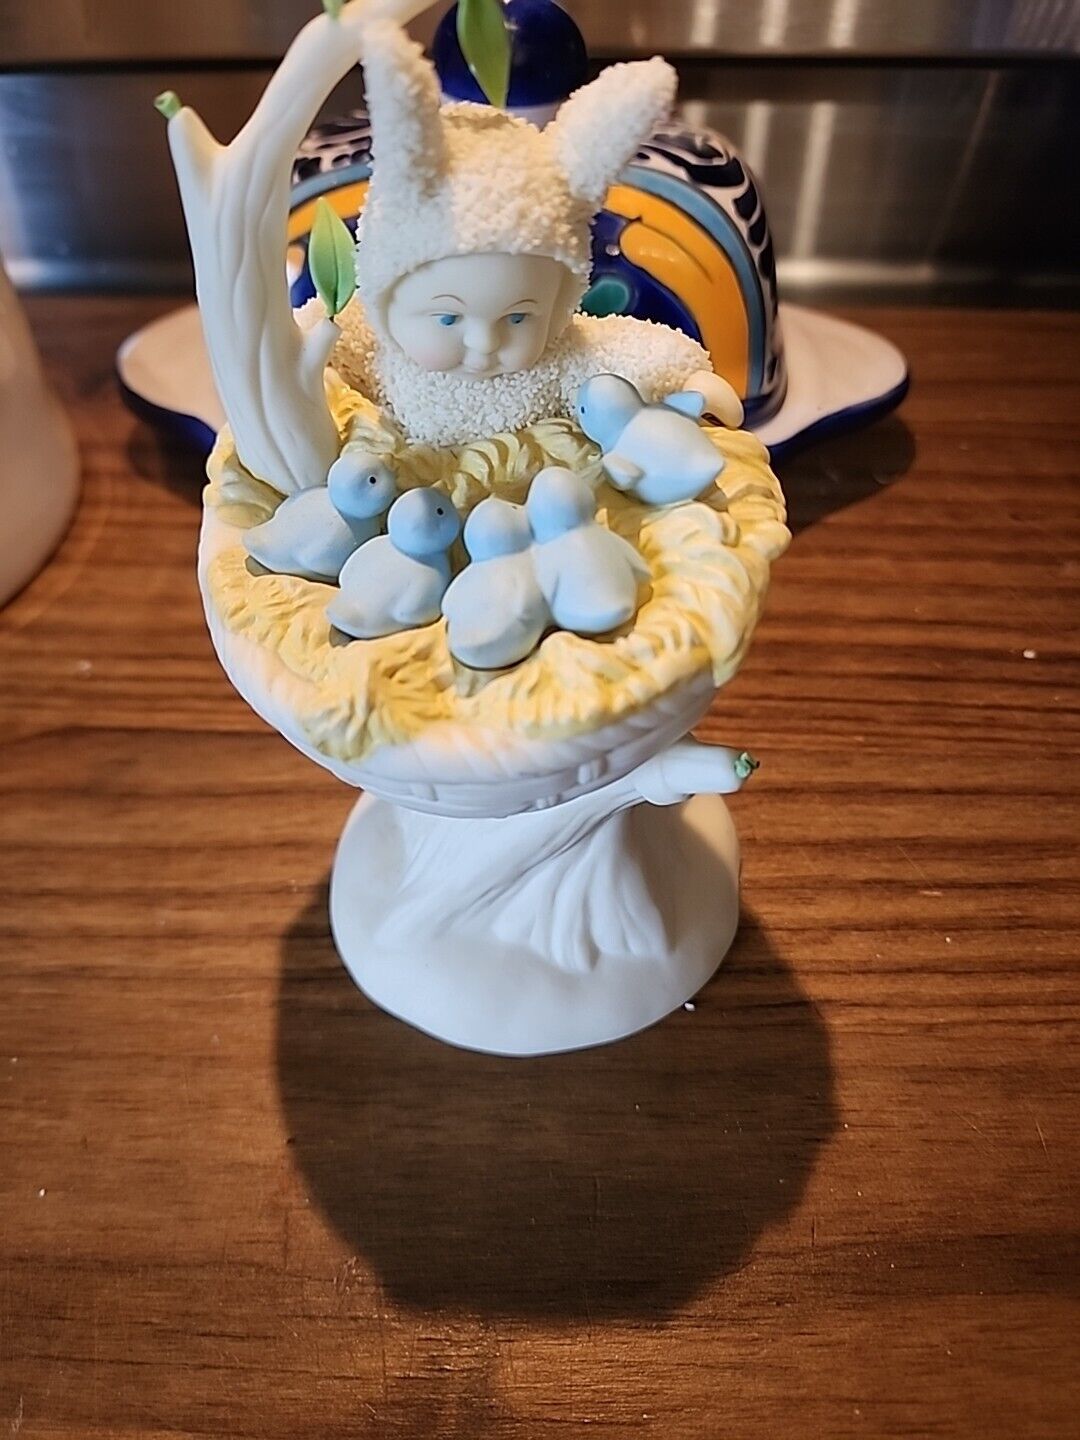 2004 Snowbabies Dept 56 Theres No Place Like Home Snowbaby In Blue Bird Nest